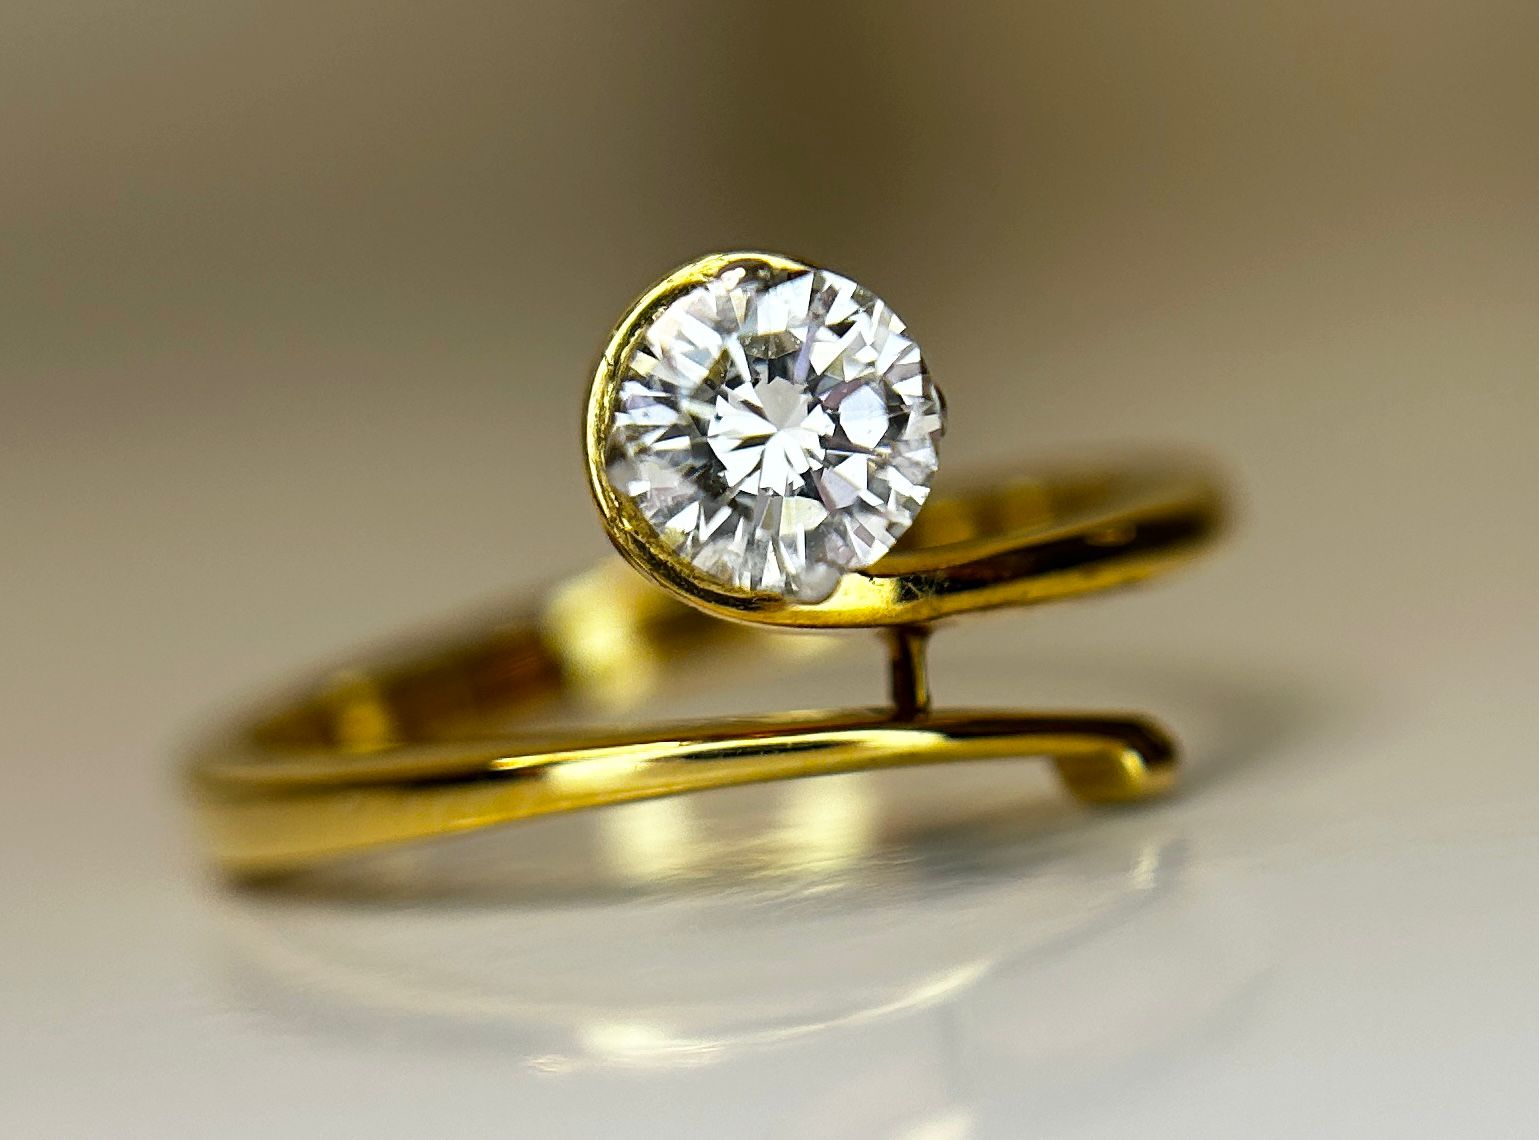 Beautiful Natural 0.30 CT VVS Diamond Ring With 18k Gold - Image 2 of 6